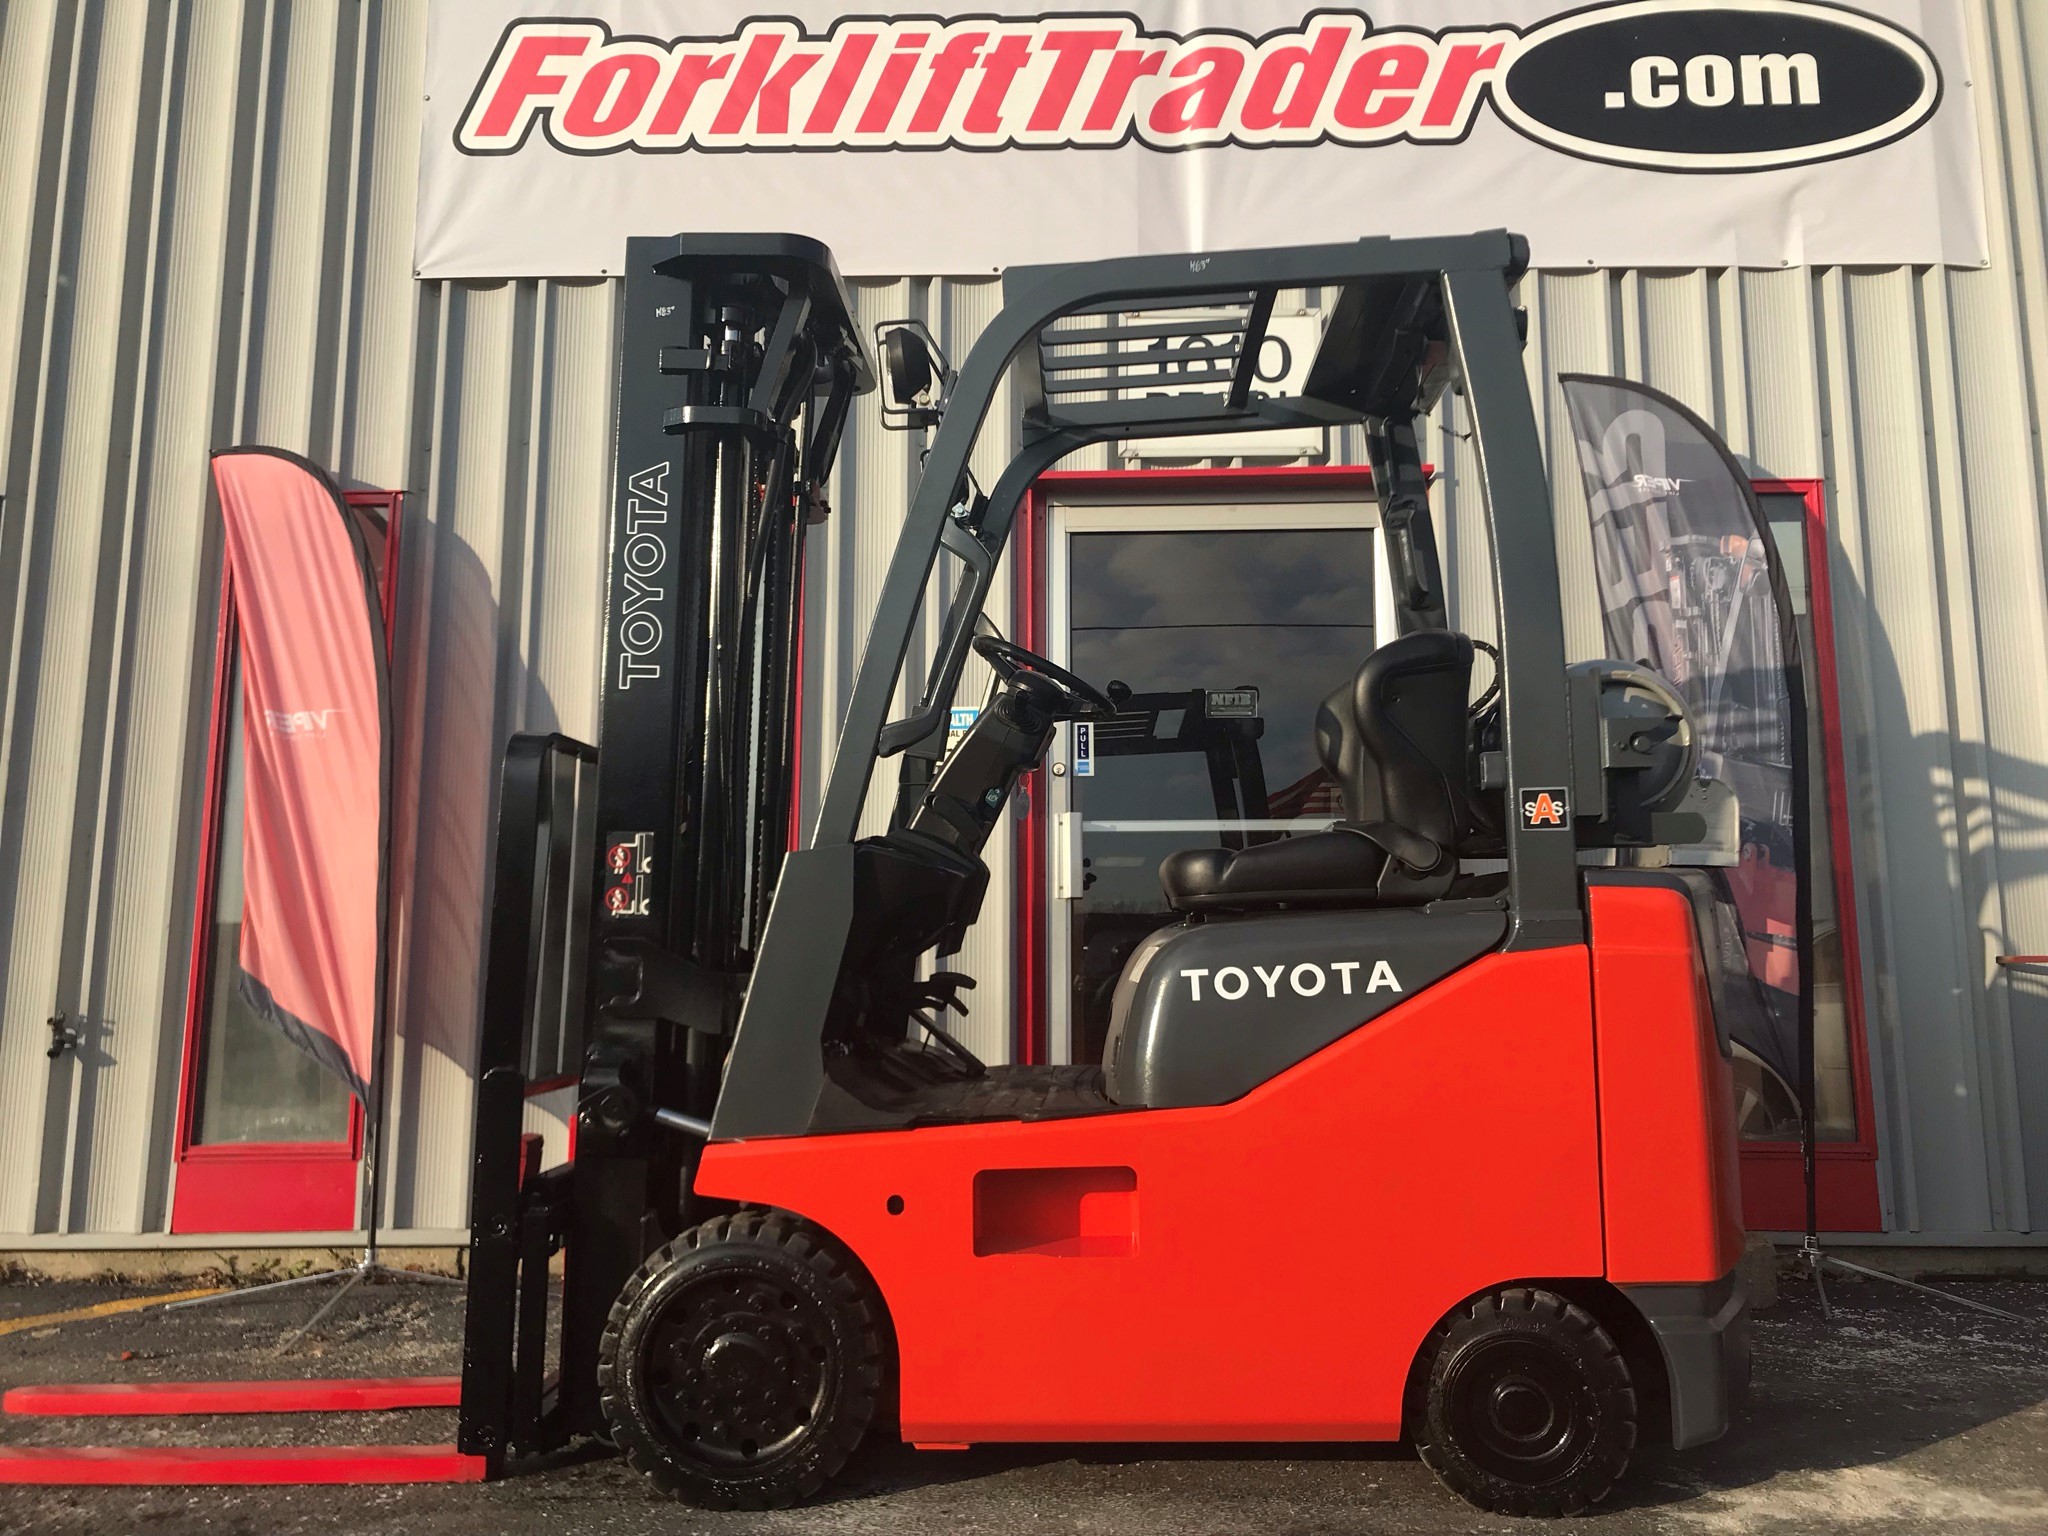 2011 toyota forklift with 42" forks for sale